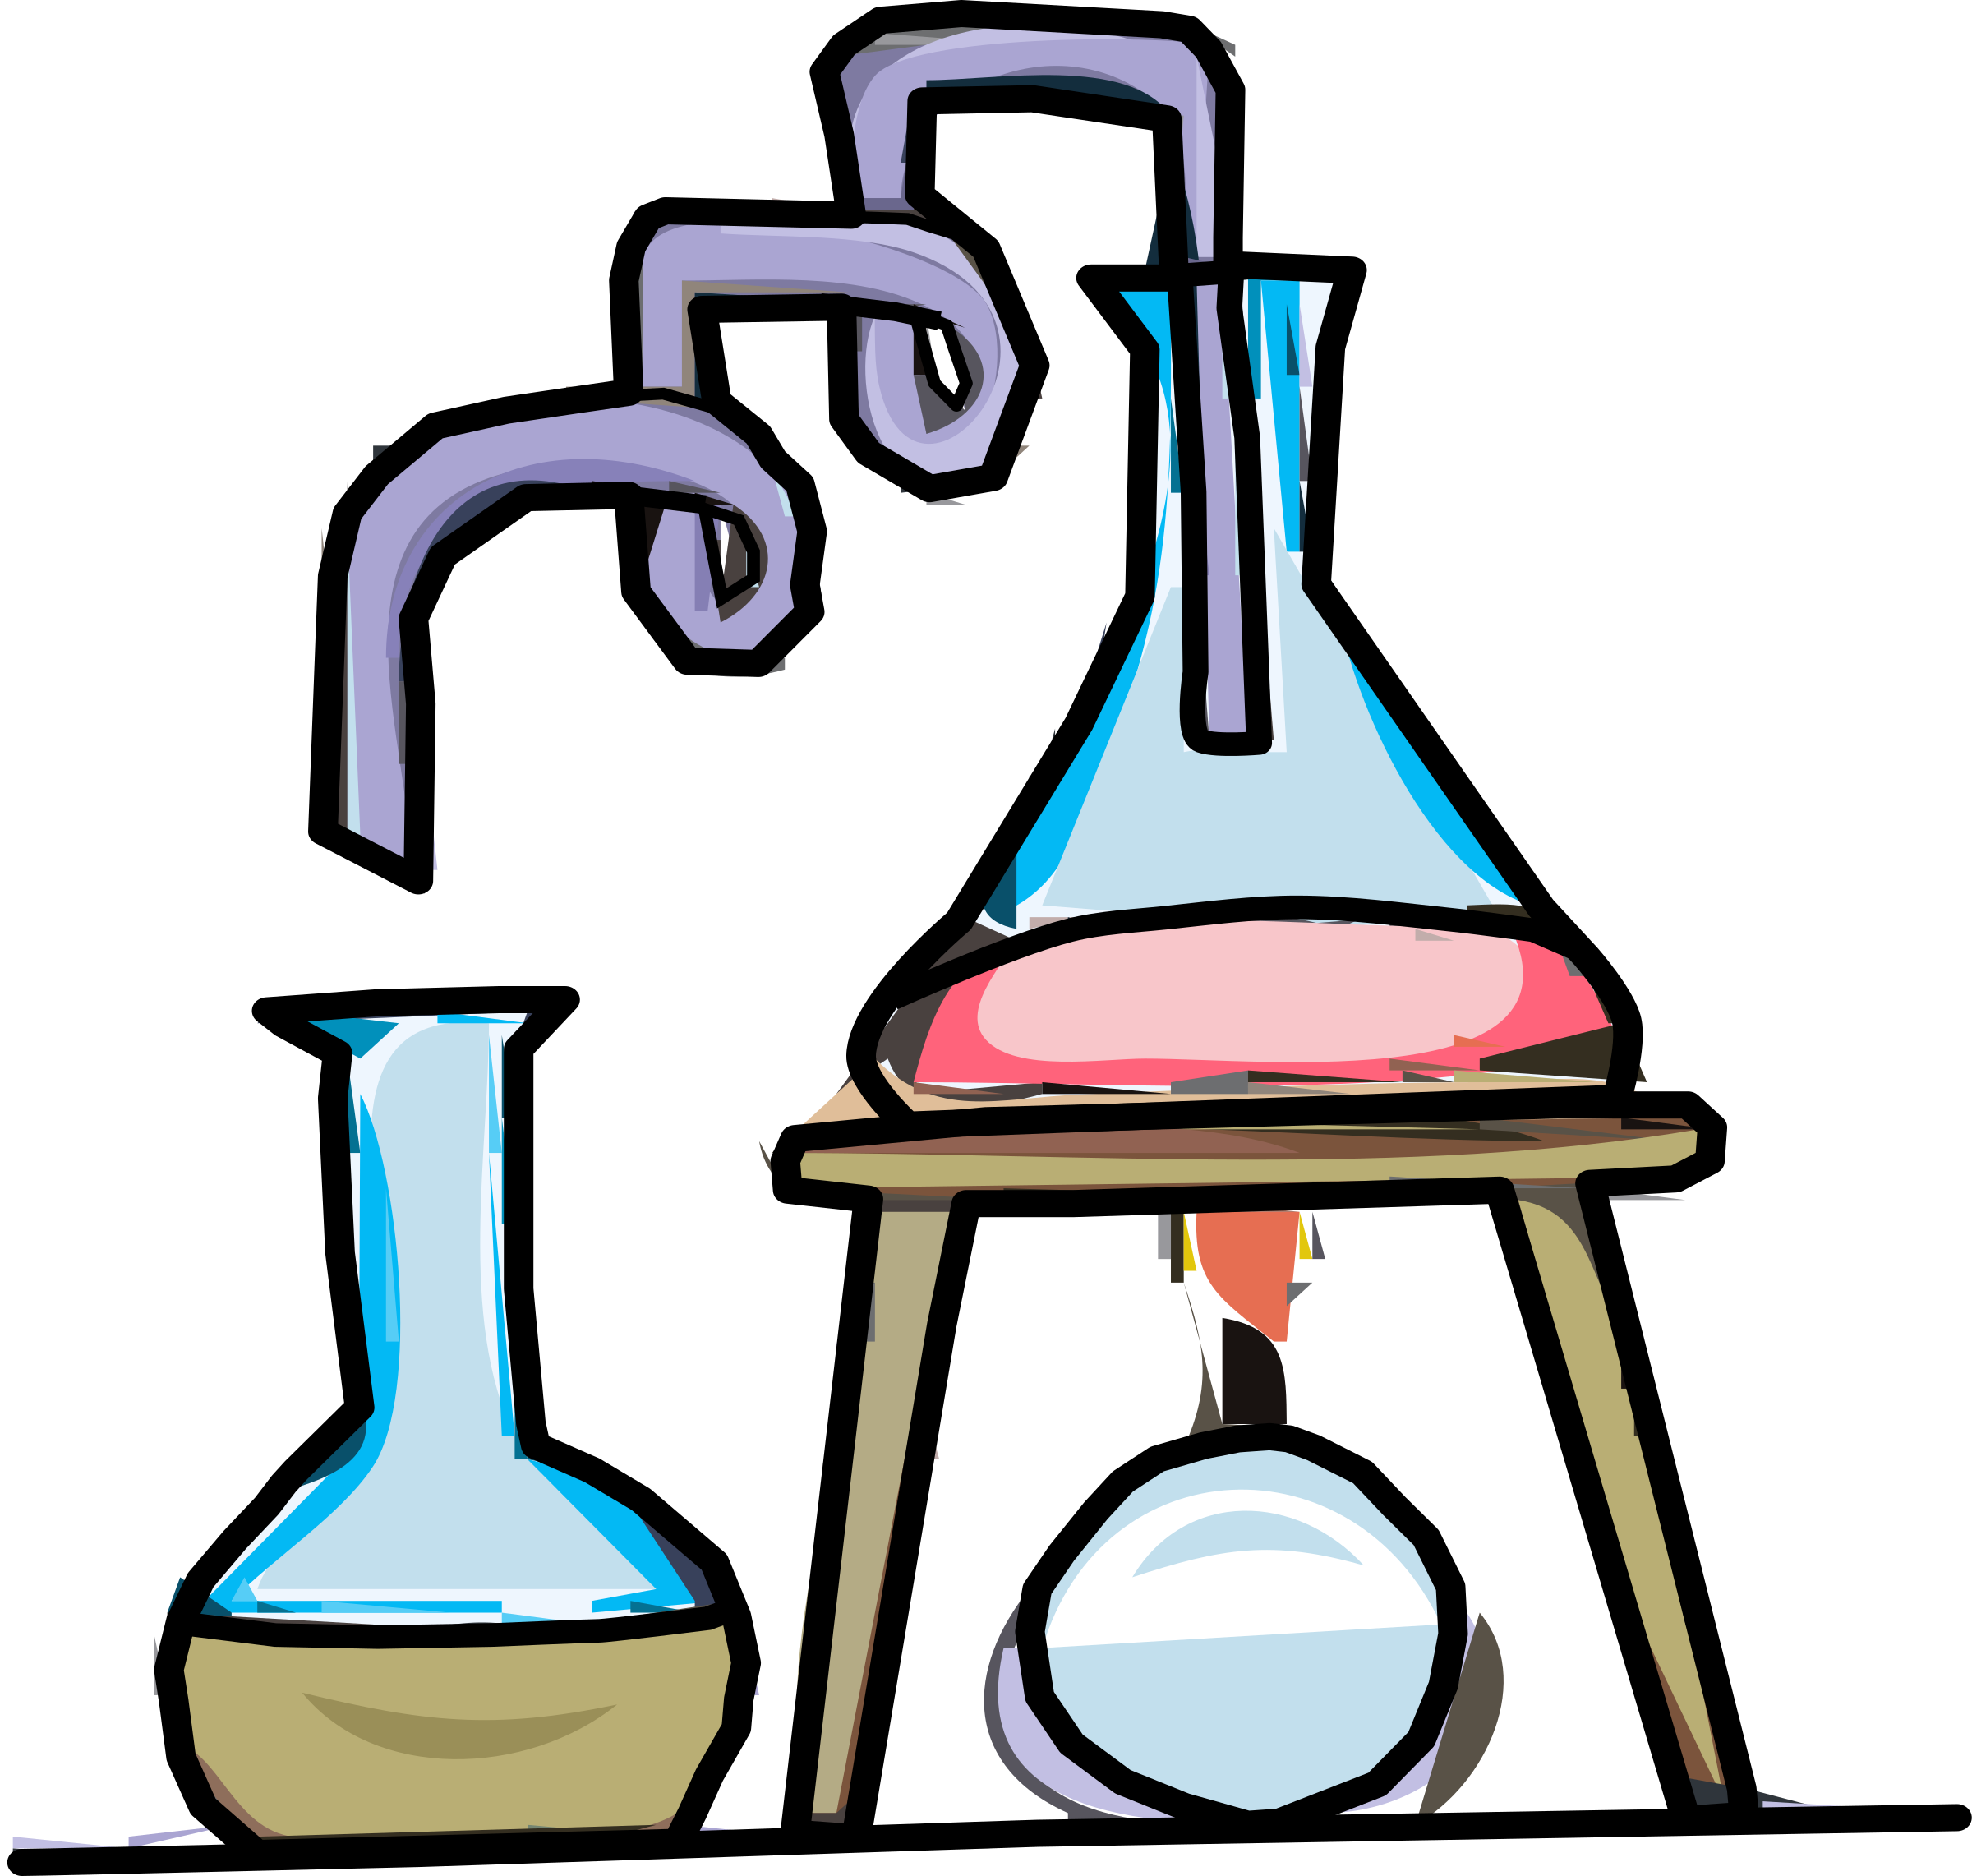 Science Test Tubes Laboratory Clip art science png download 2400*